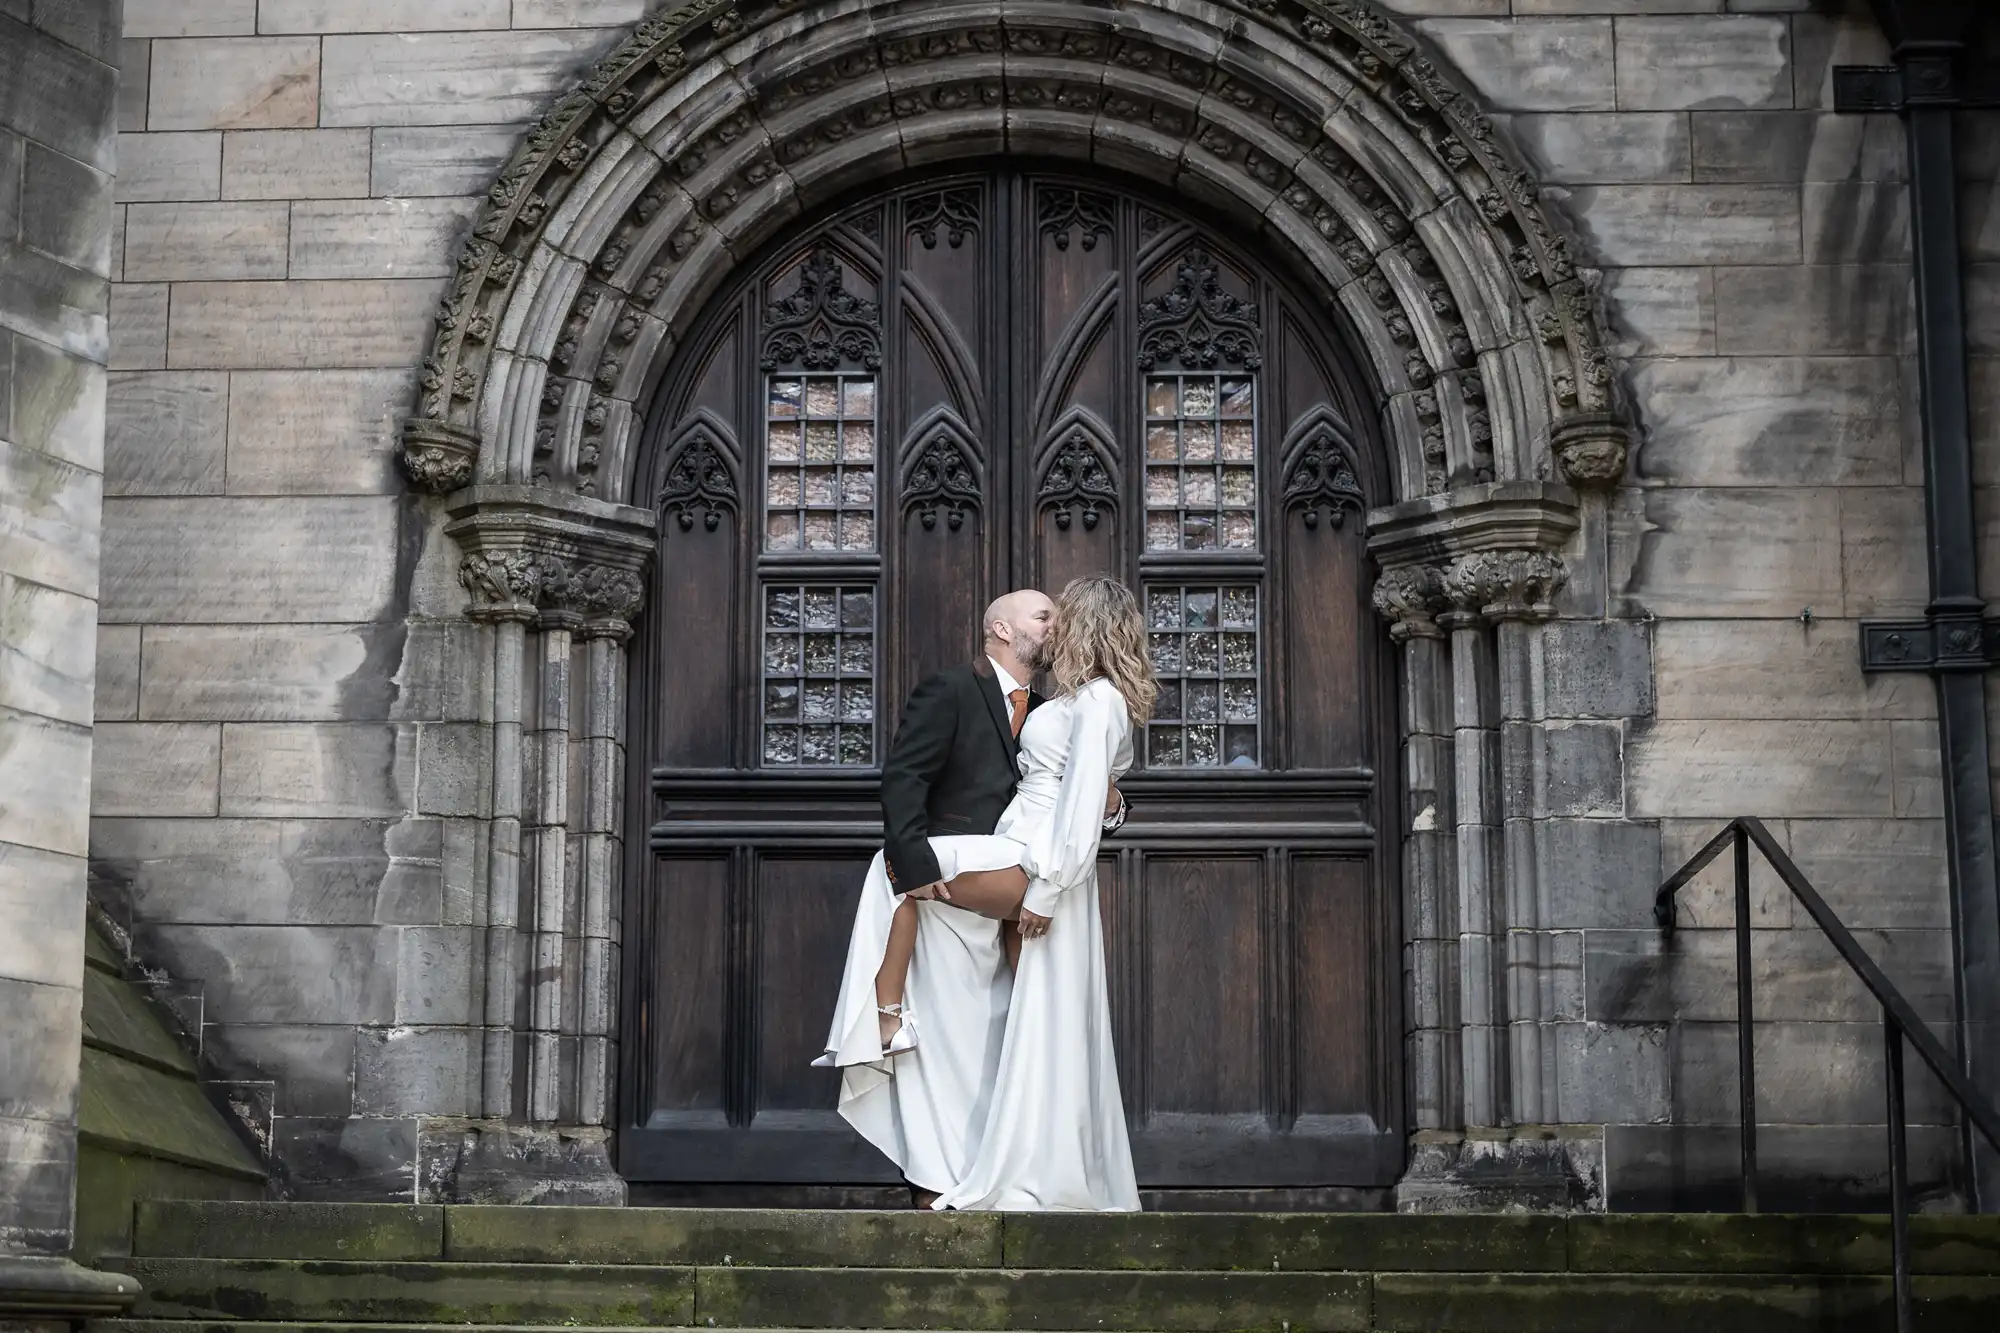 A couple in formal attire kisses in front of a Gothic-style arched wooden door with intricate stone carvings. The man wears a dark suit, and the woman wears a long white dress.